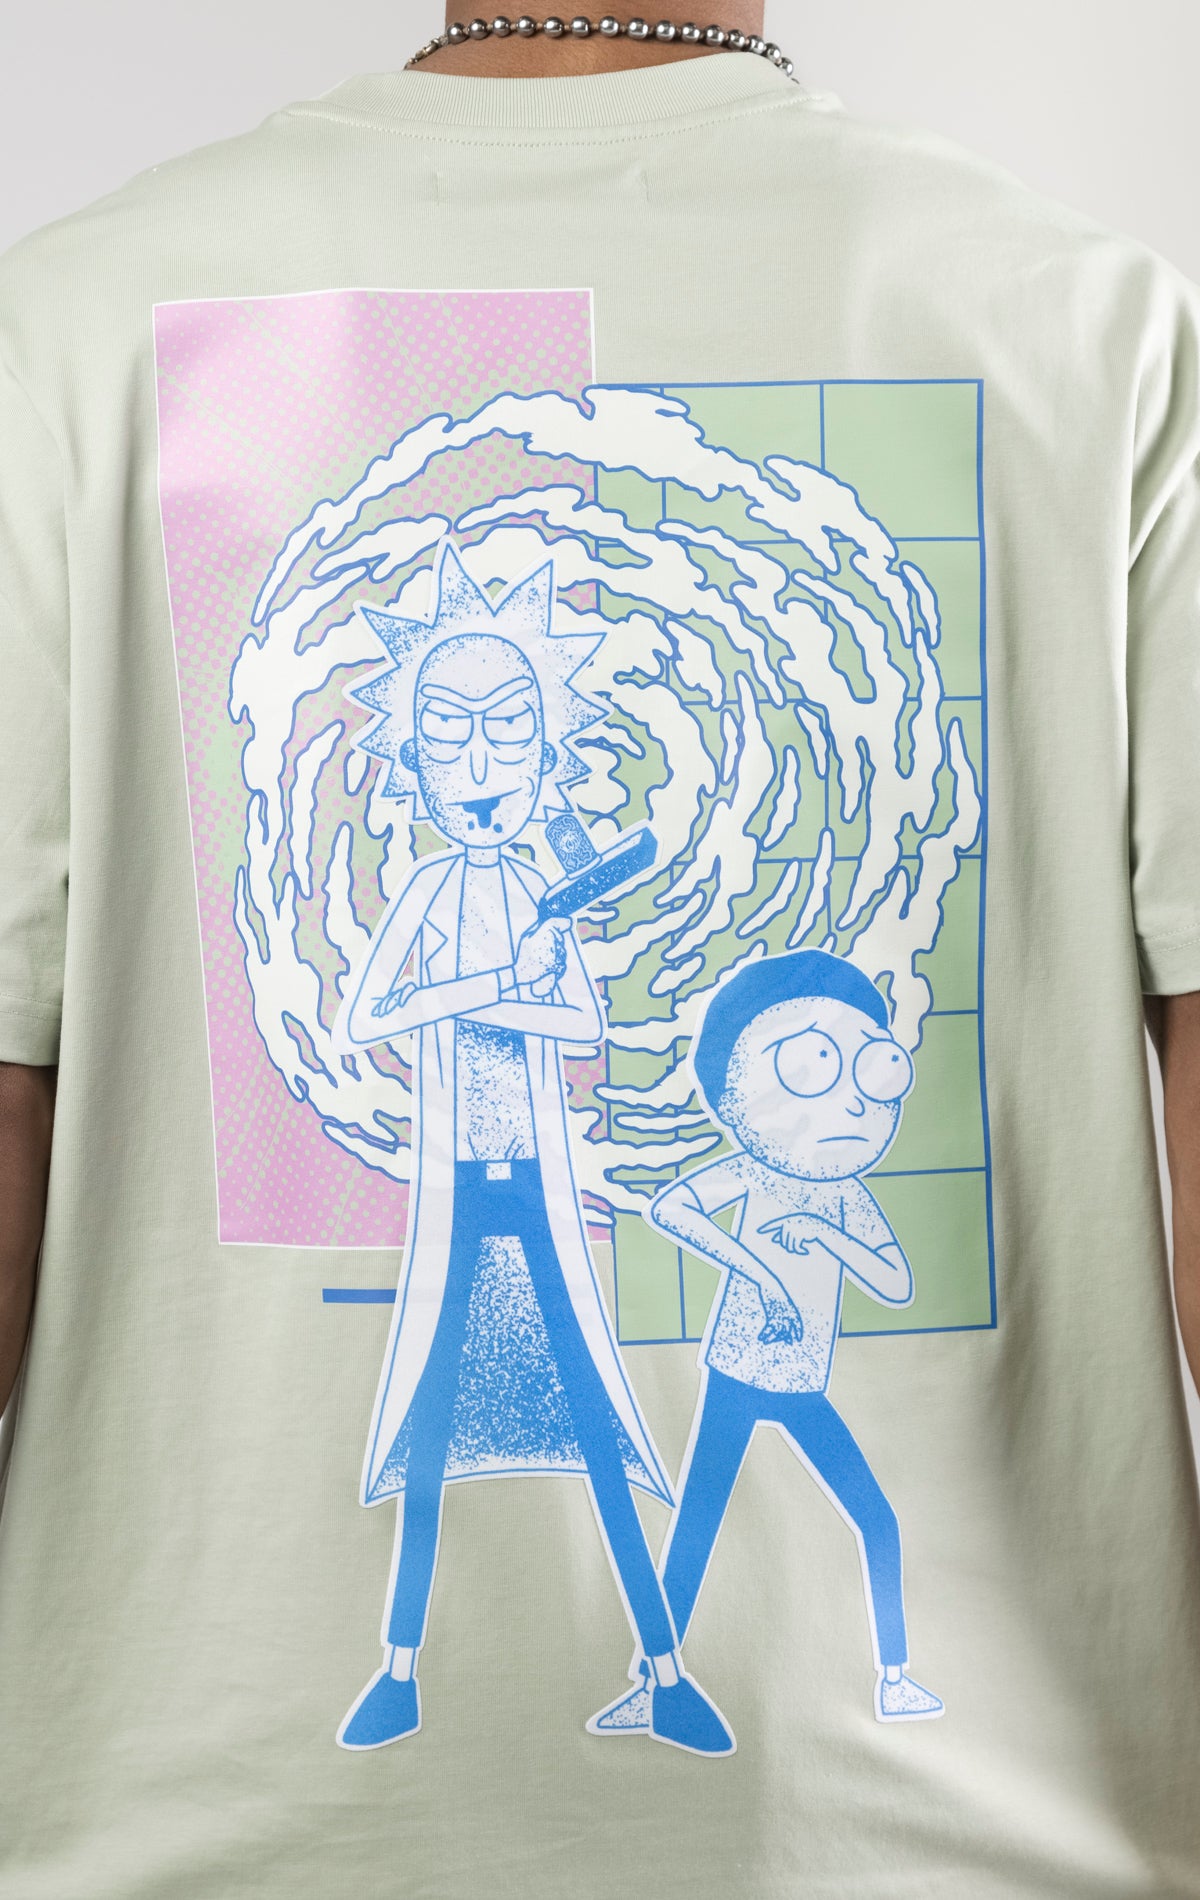 Rick And Morty graphic t-shirt in a relaxed fit with dropped shoulders and a crew neck. The shirt features heat-sealed graphics and a chenille applique with embroidered details.